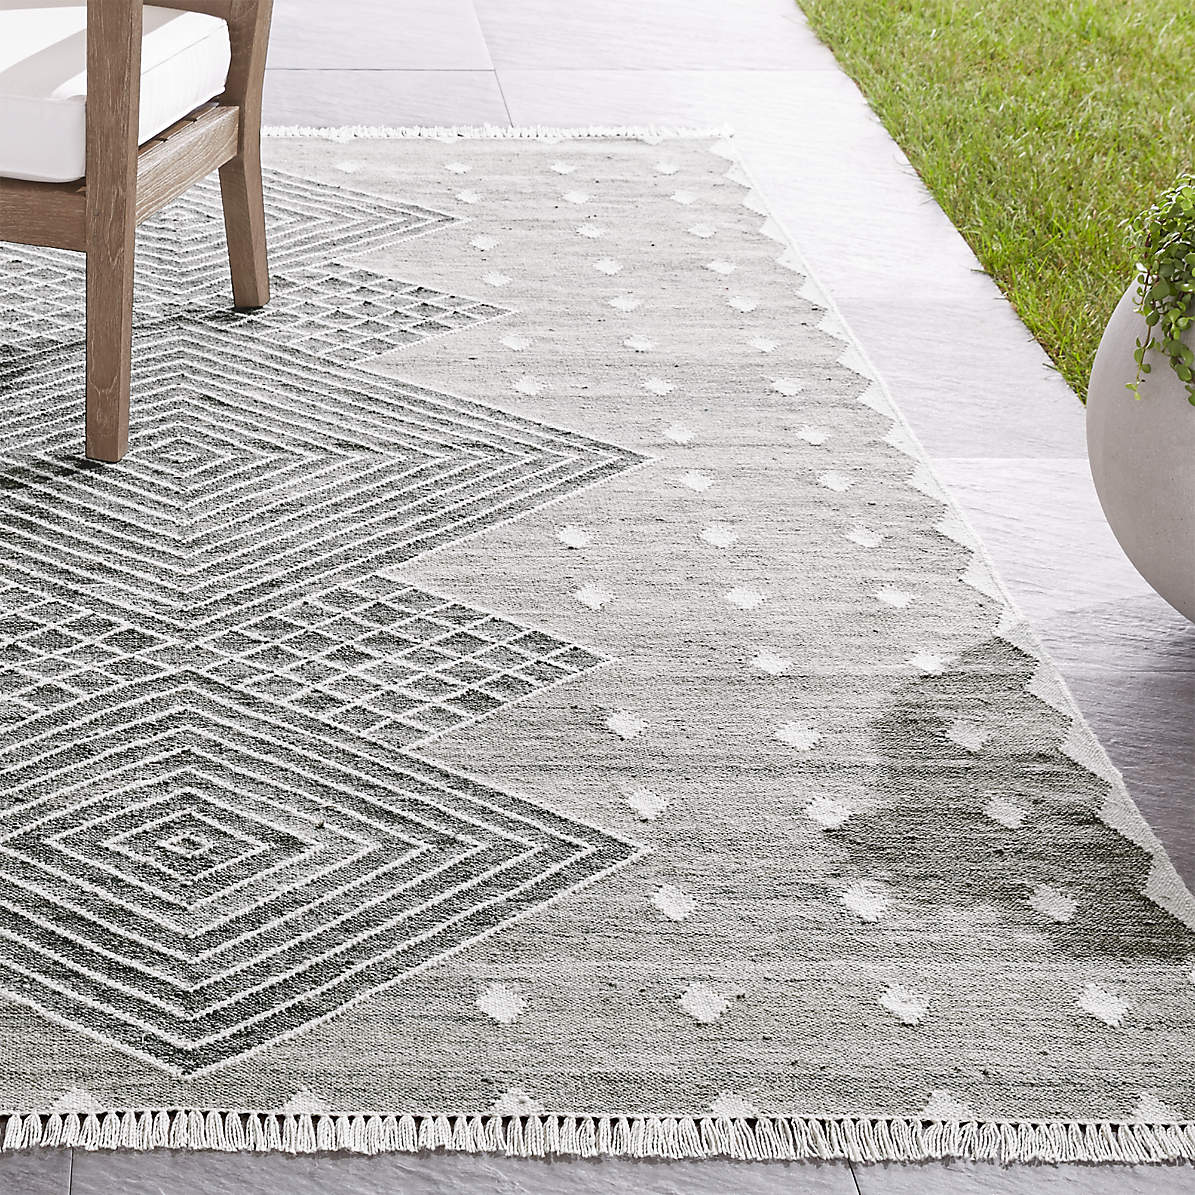 Ceri Grey Indoor Outdoor Rug Crate, Outdoor Area Rugs Made From Recycled Plastic